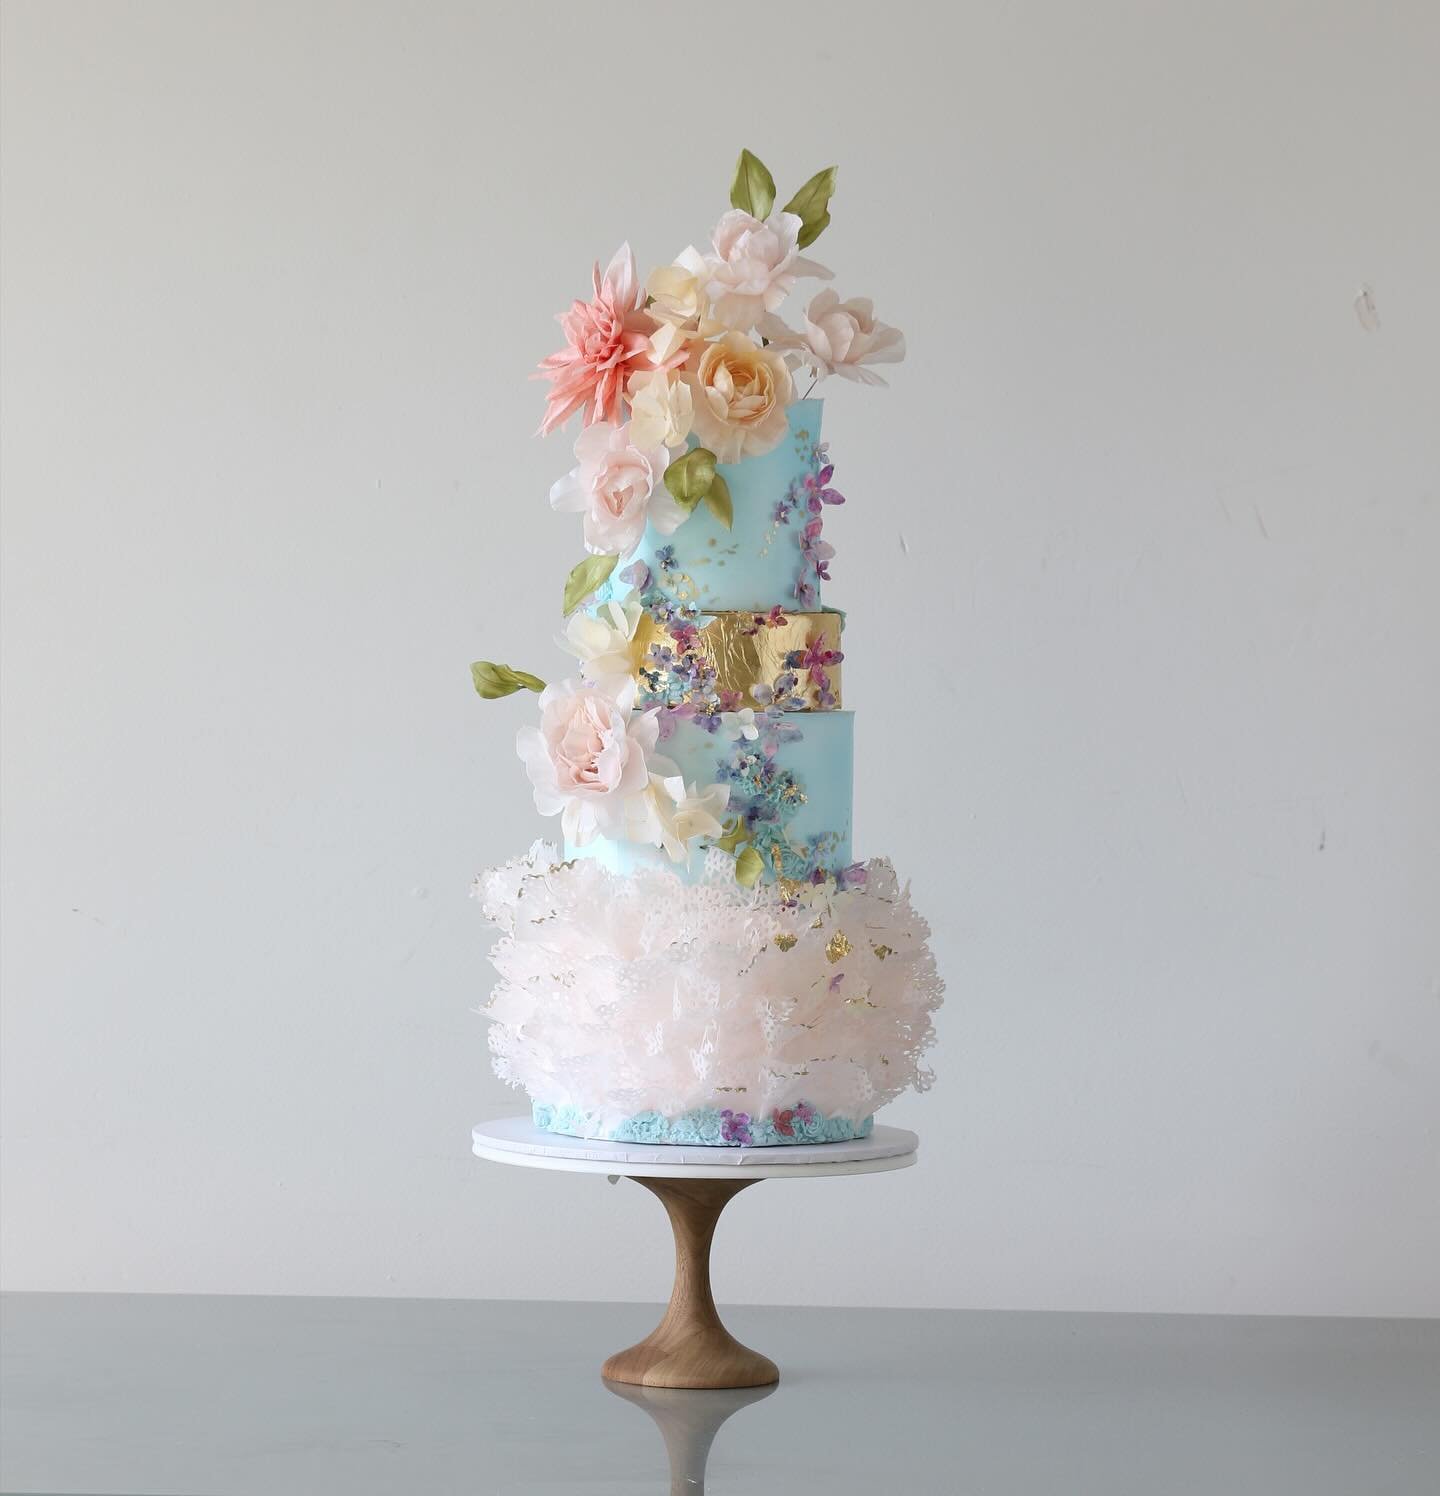 I made this pretty wafer cake in a class with the talented @petitepivoine_cakes and hosted by lovely @zoeclarkcakes , looking forward to using some of these techniques on my own designs